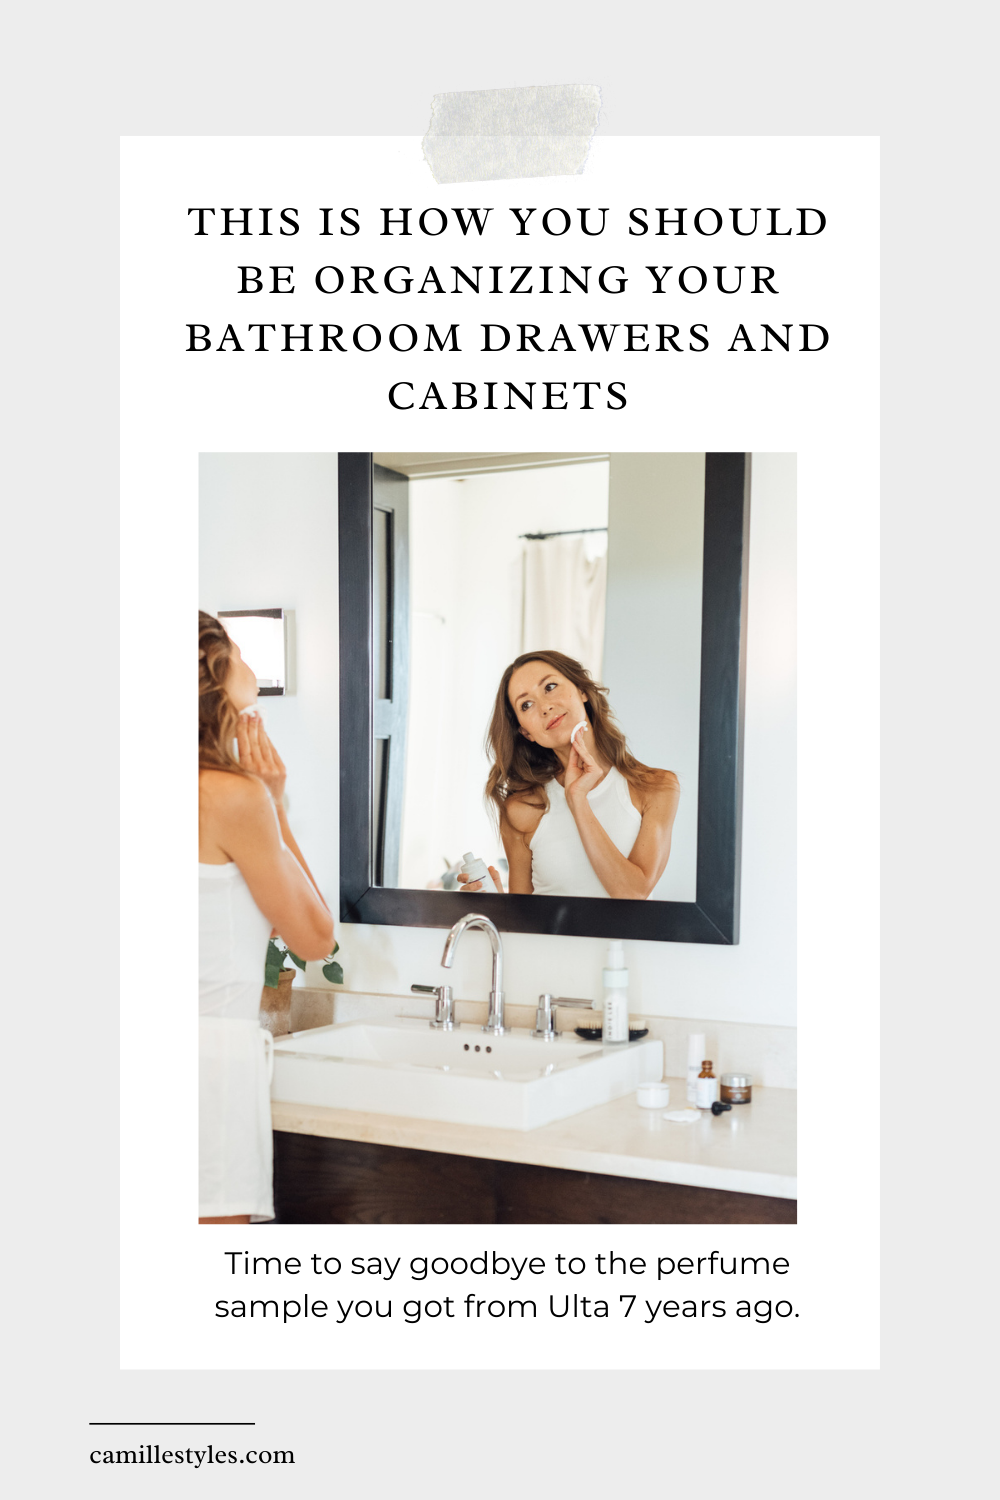 https://camillestyles.com/wp-content/uploads/2021/02/f5d2bf09-pinterest_-this-is-how-you-should-be-organizing-your-bathroom-drawers-and-cabinets.png